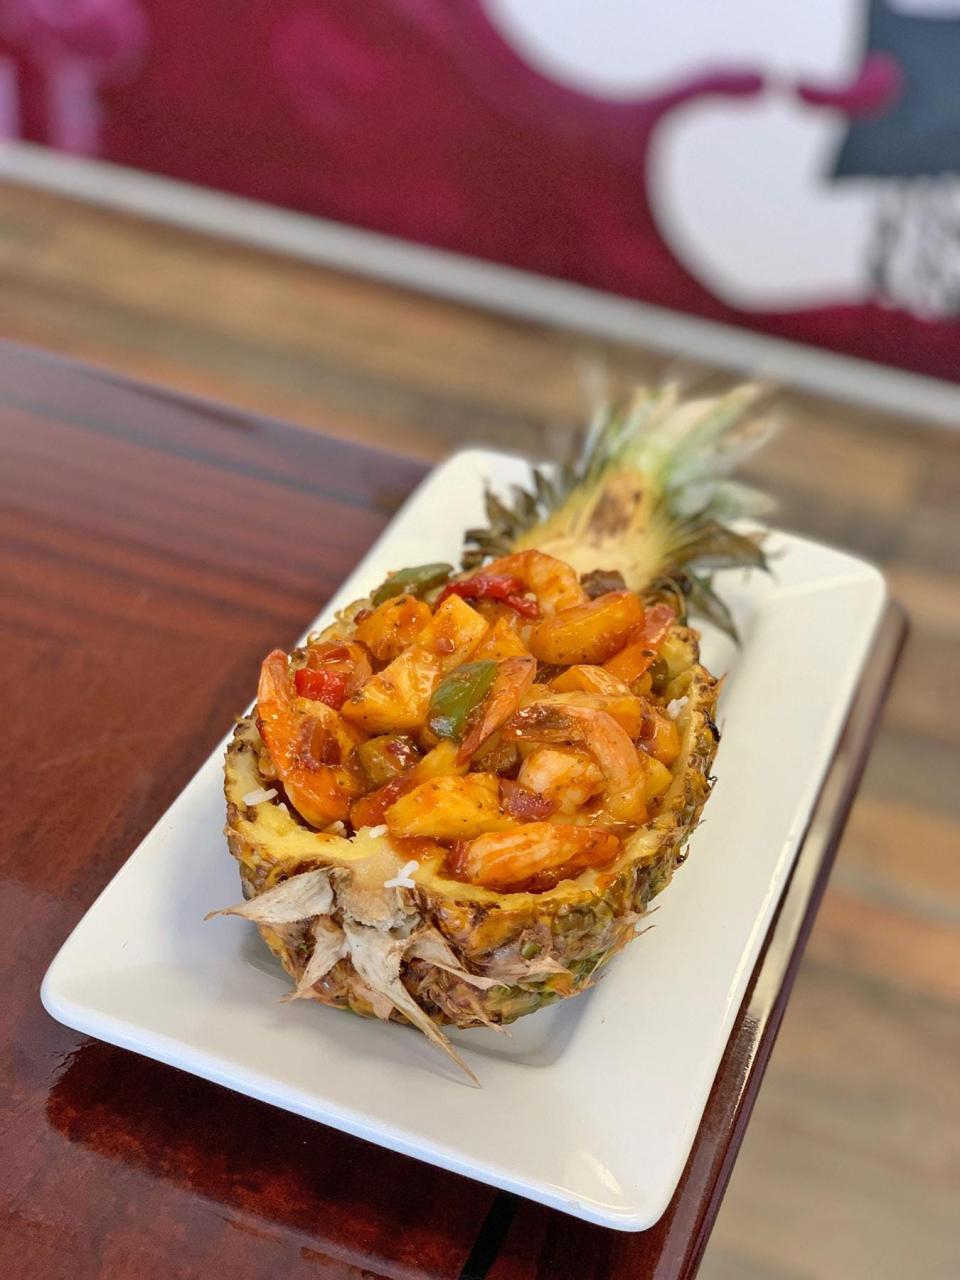 The Pink Salt pineapple shrimp boat is copious portion of diced pineapple and tail-on shrimp mixed with a sweet sauce and peppers.